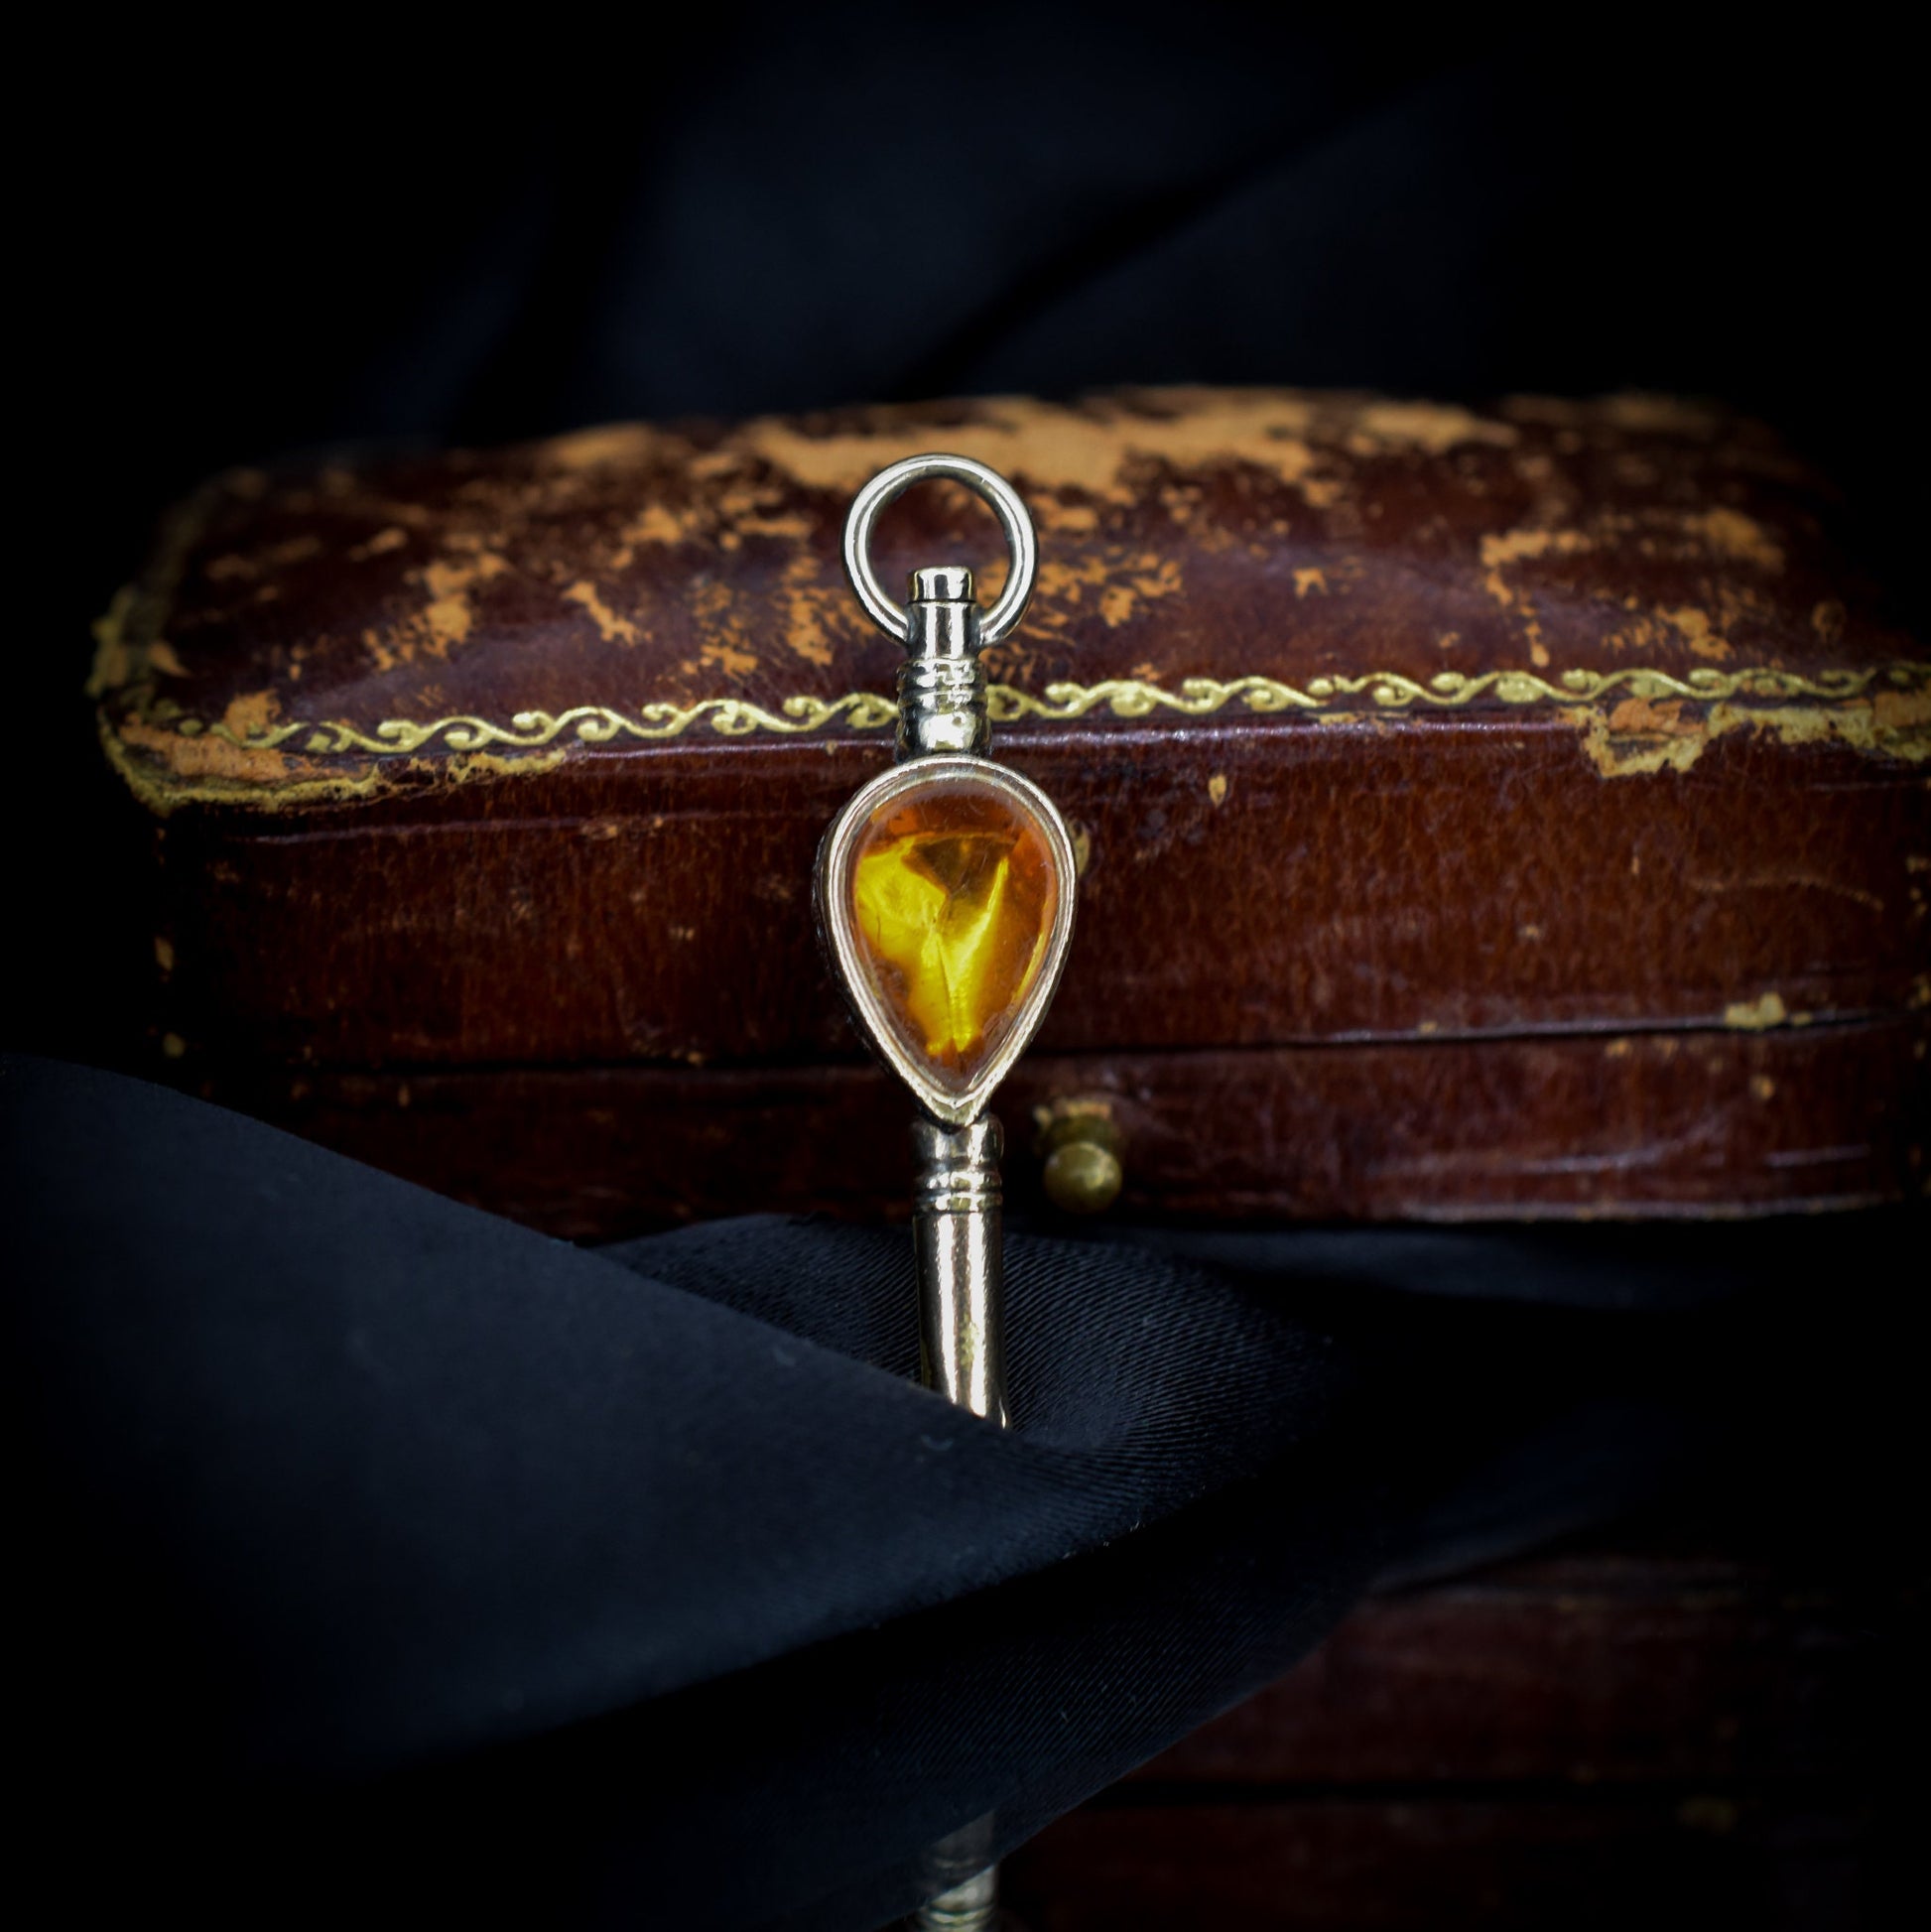 Antique Foiled Citrine and Bloodstone Gold Watch Key Fob Pendant Charm - Victorian